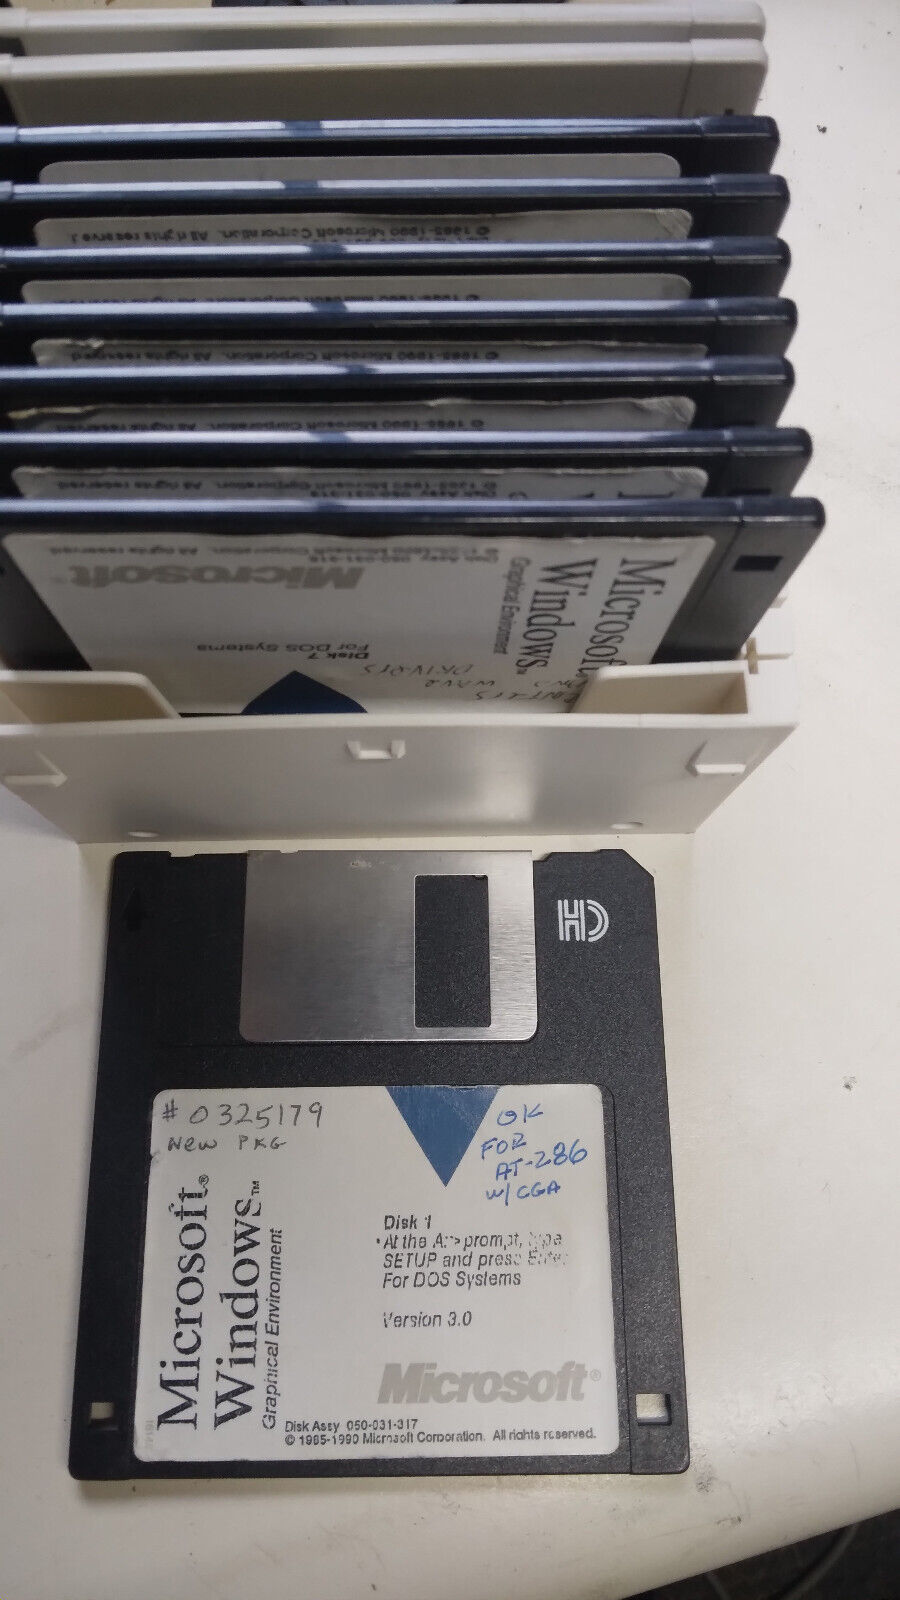 Microsoft Windows 3.0 on 1.44 FD. 8-disk set with activation code.